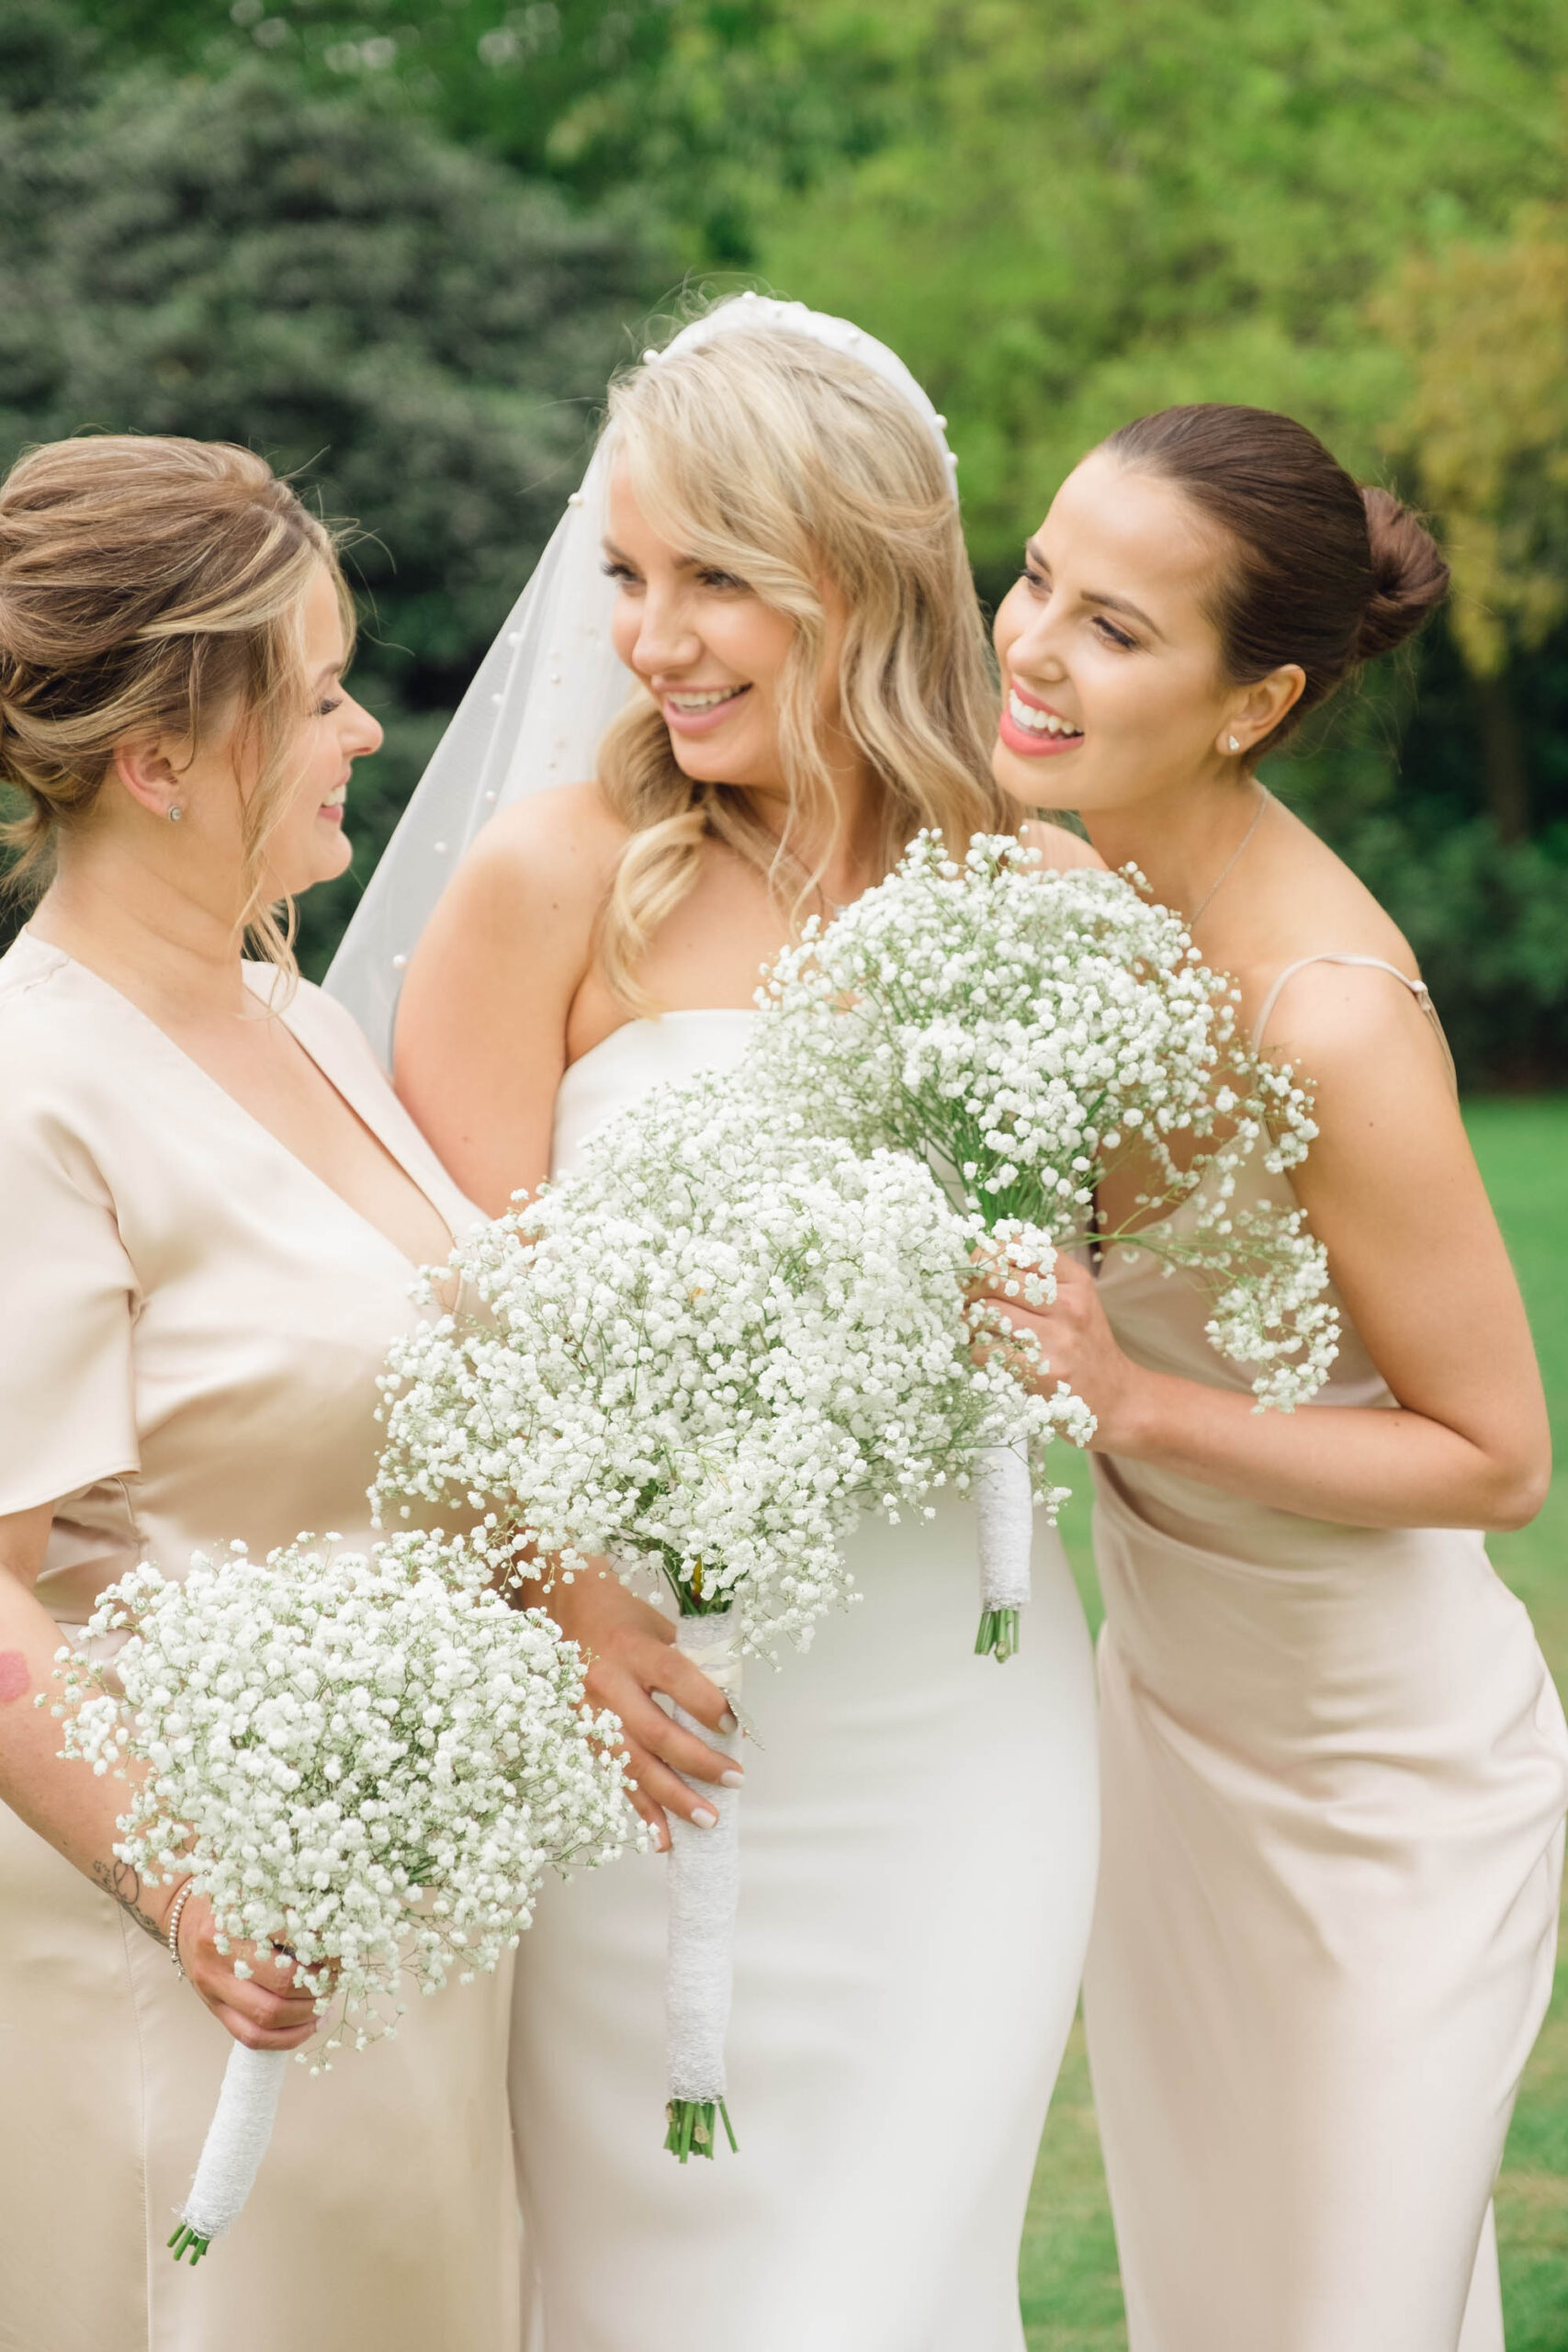 Bride and bridesmaids all with gypsophila bouquets. They're giggling and talking. By Jordan Fox Photography